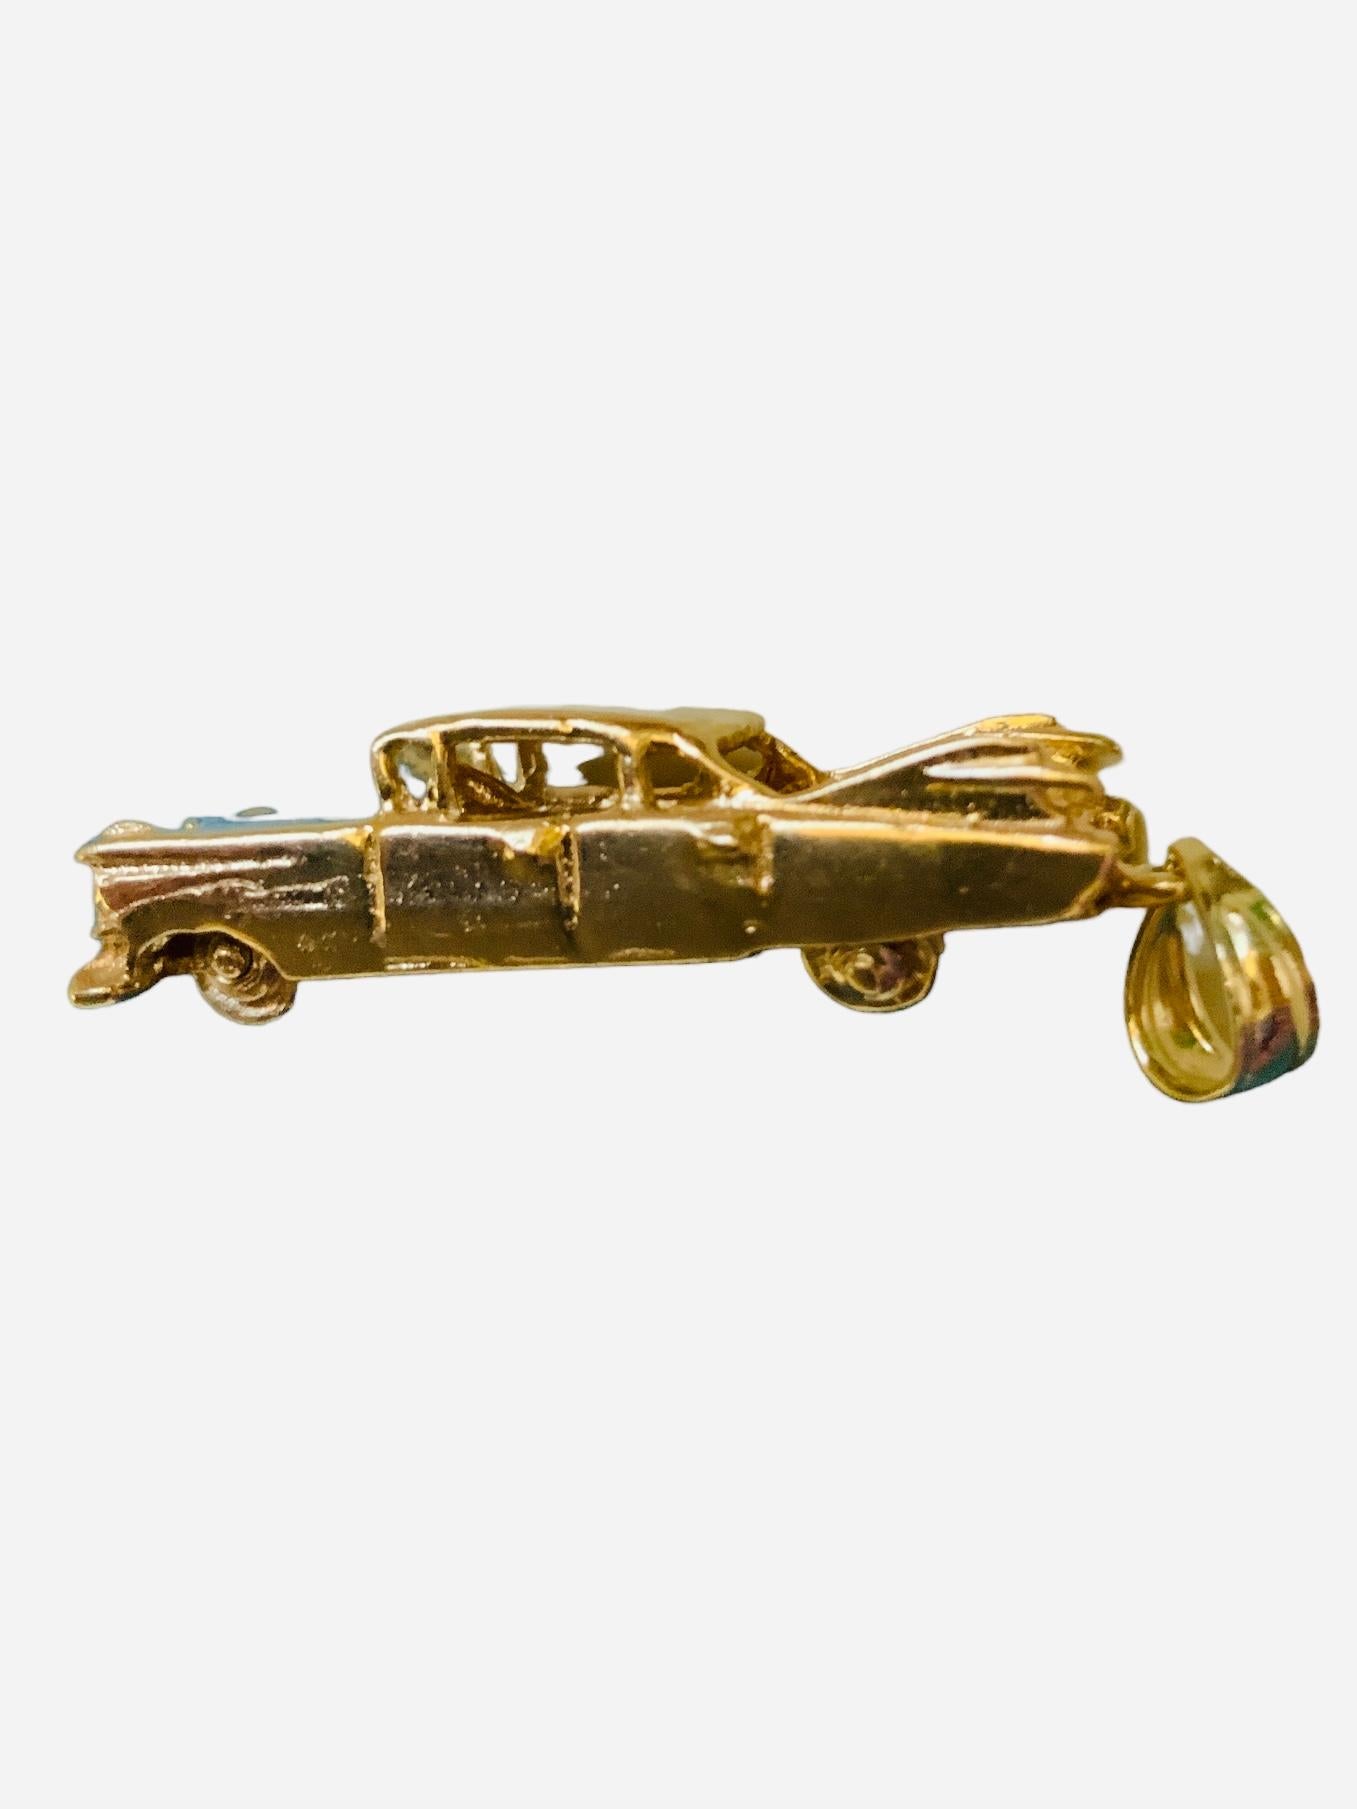 Modern 14K Gold Midcentury Cadillac Charm/Pendant  For Sale